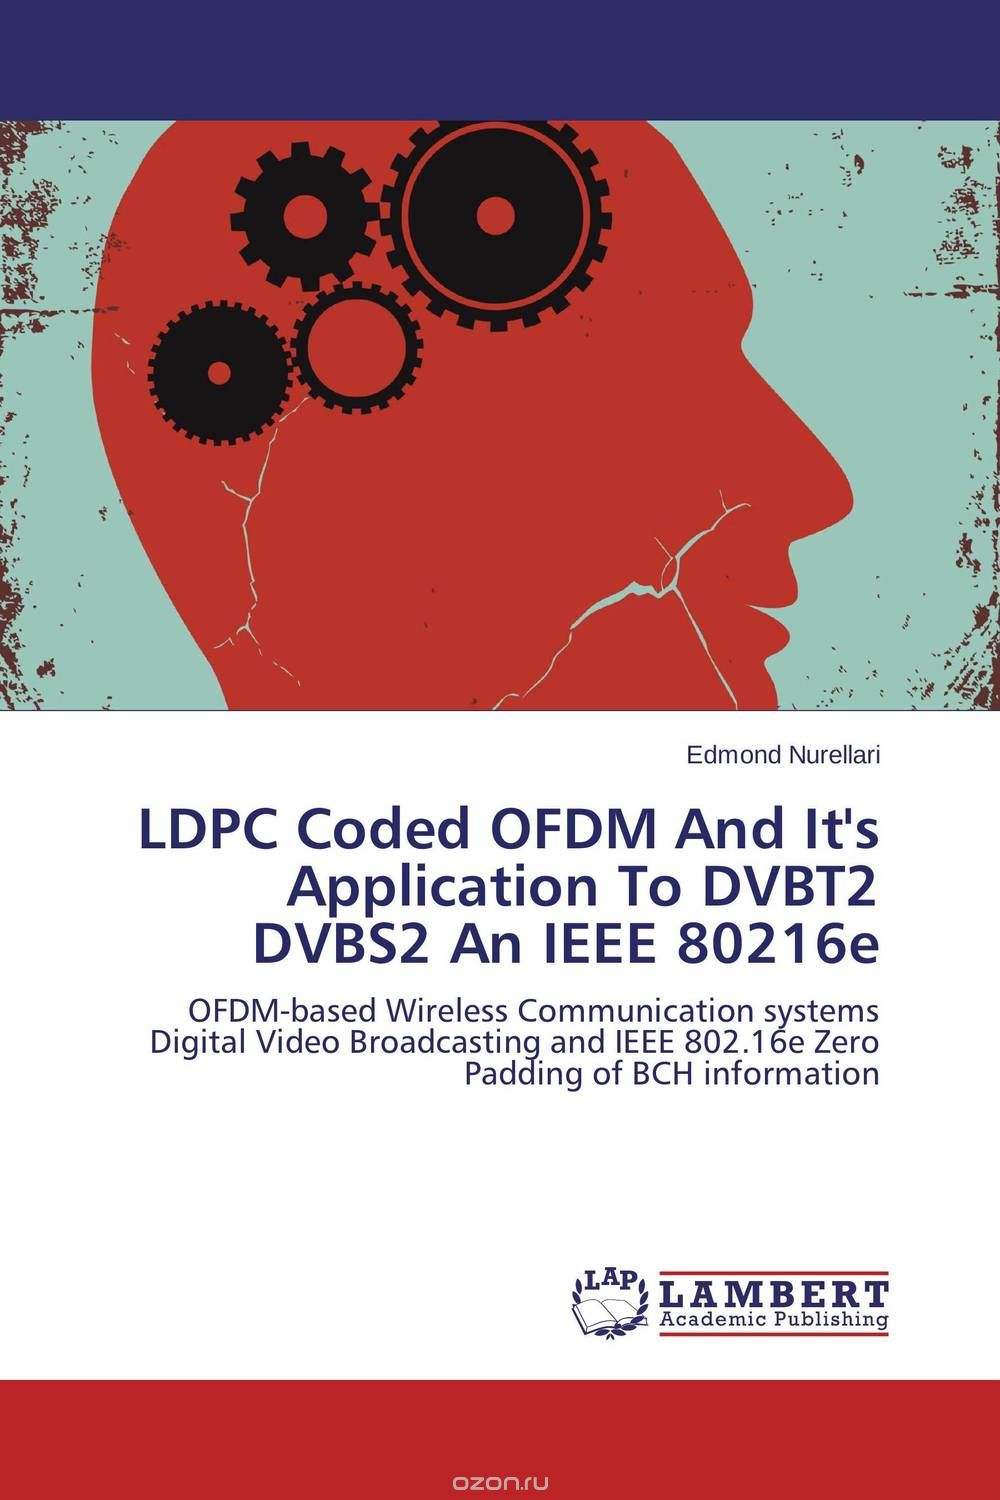 LDPC Coded OFDM And It's Application To DVBT2 DVBS2 An IEEE 80216e